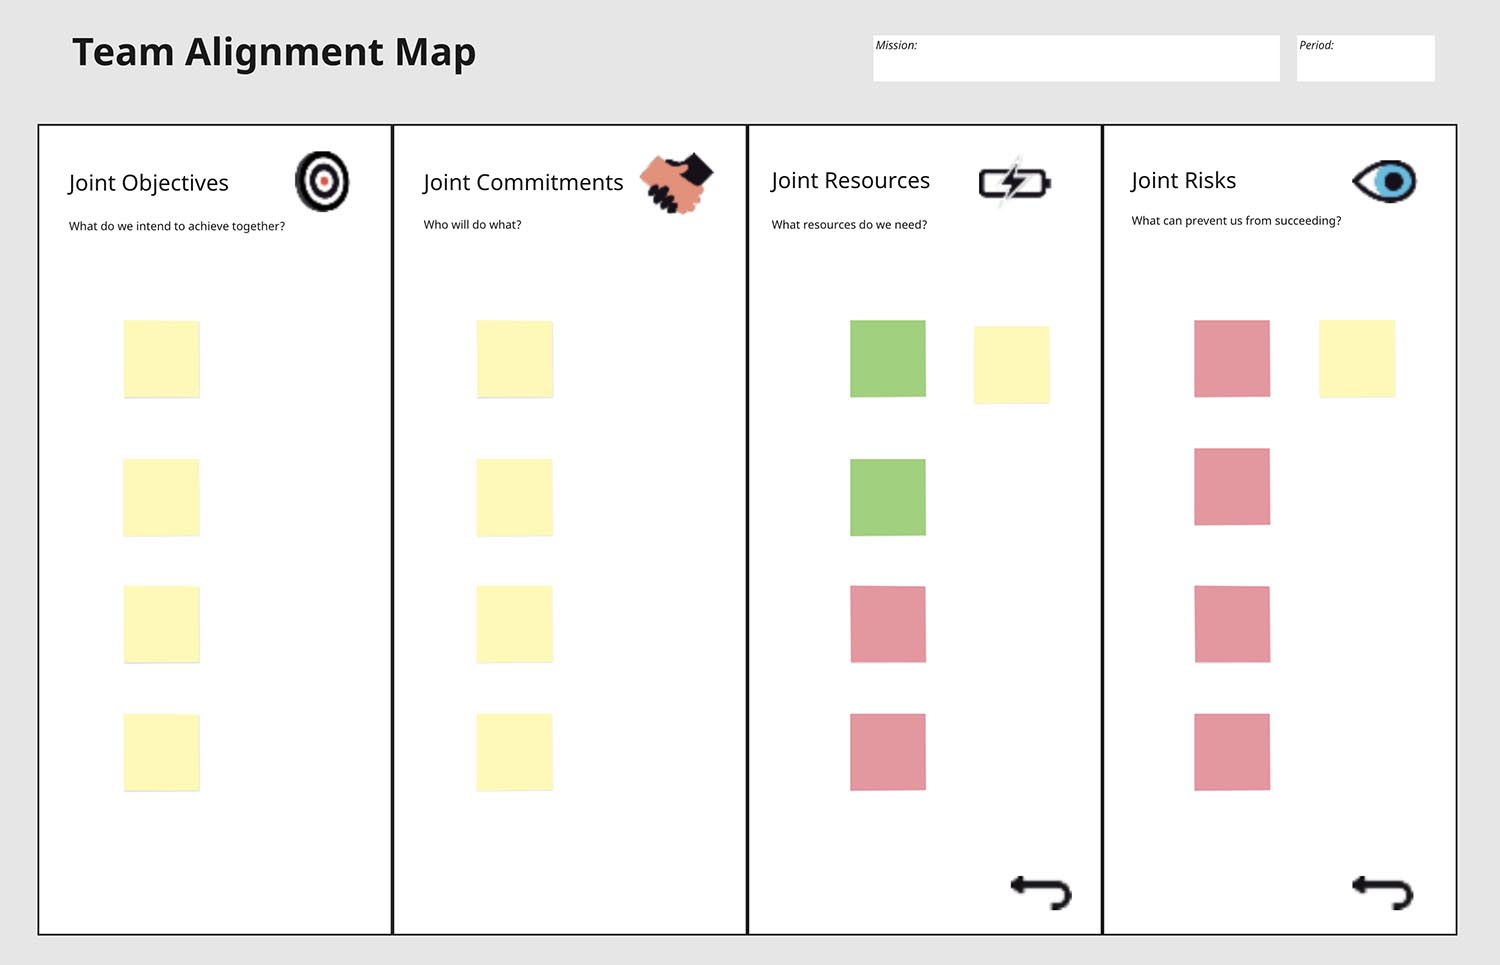 The team alignment map exercise and canvas